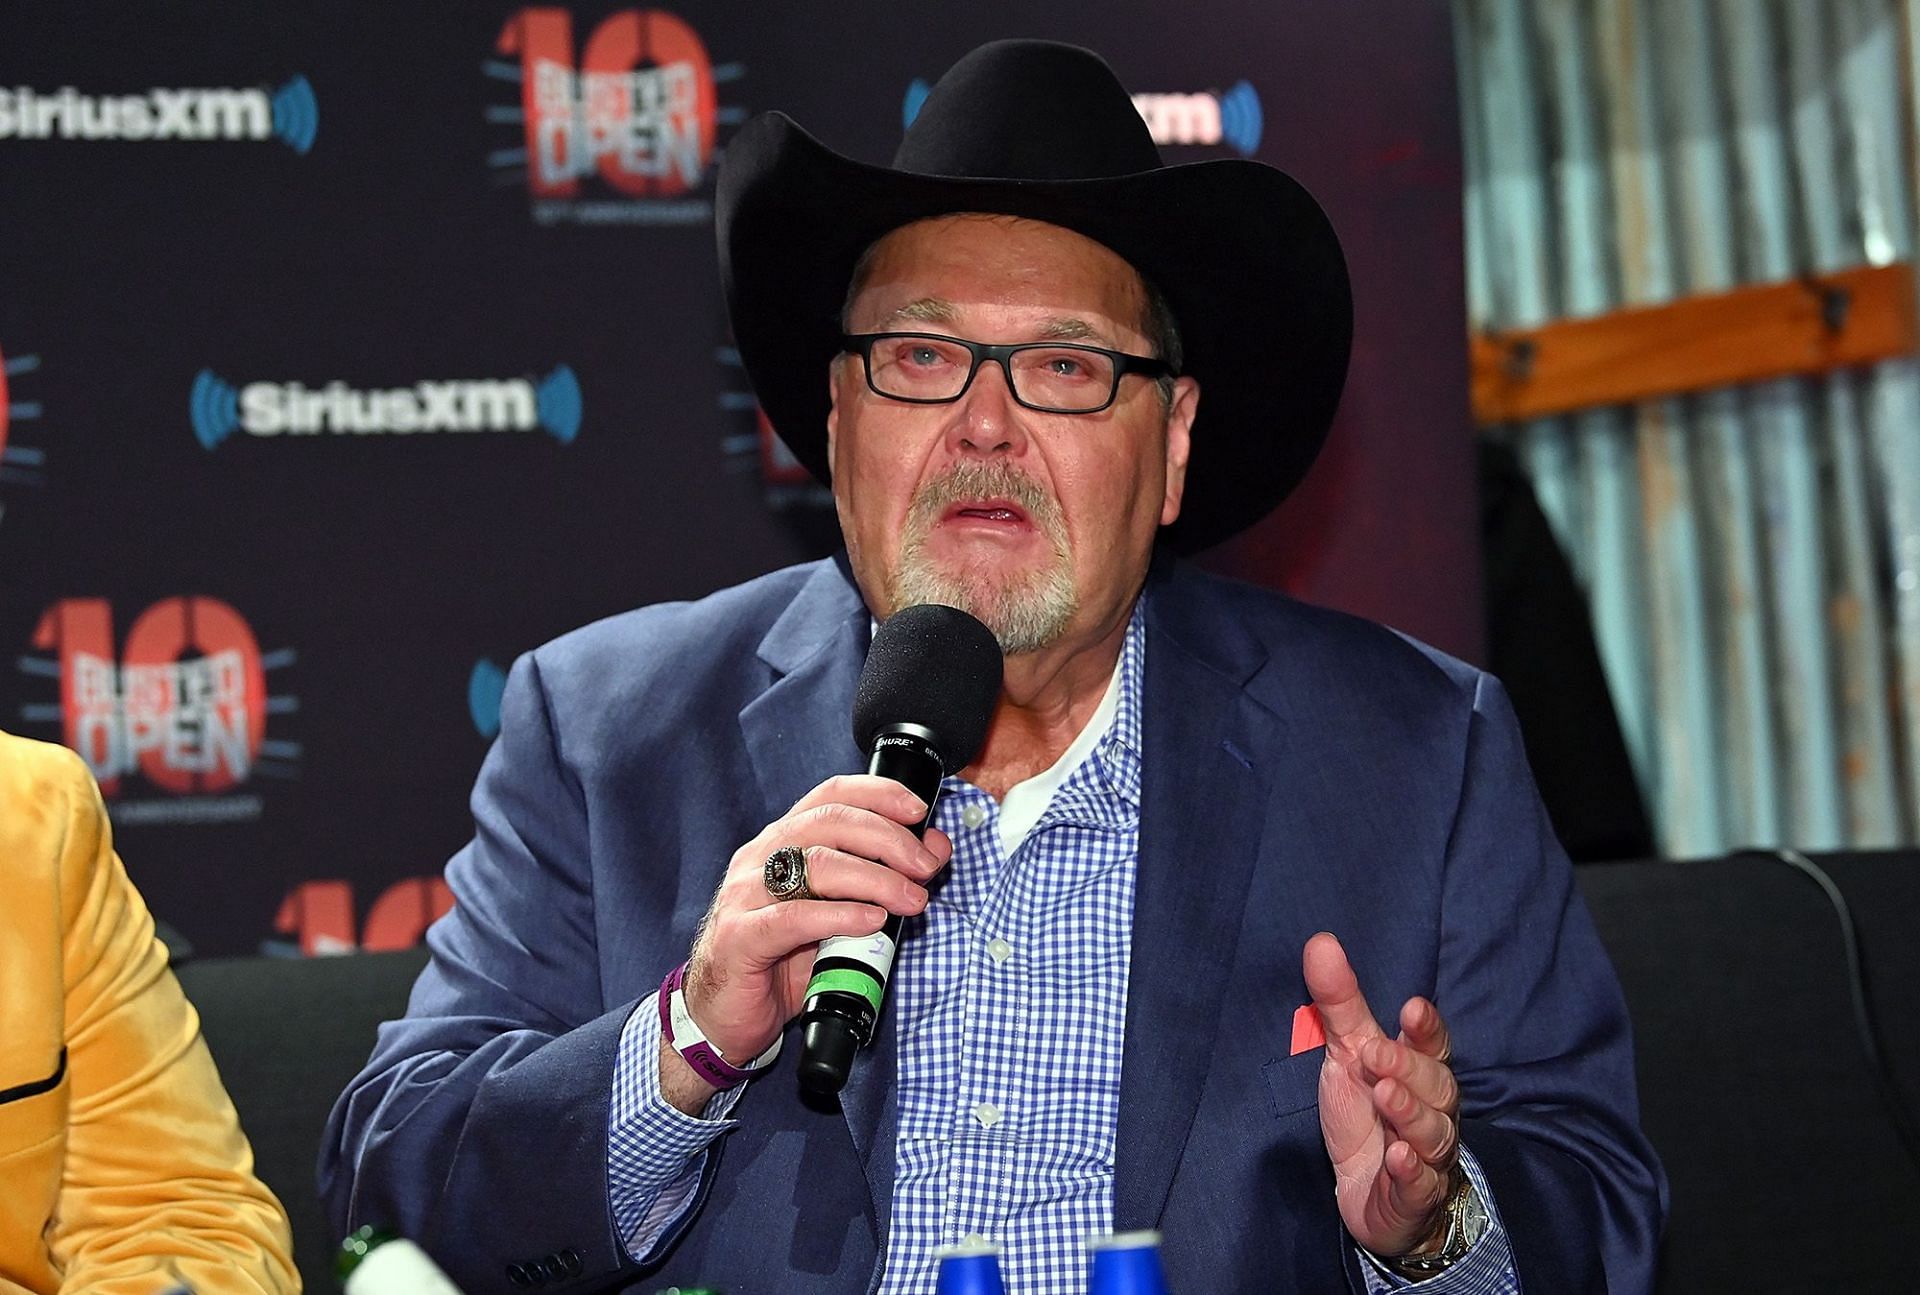 AEW commentator, Jim Ross, continues his battle with skin cancer